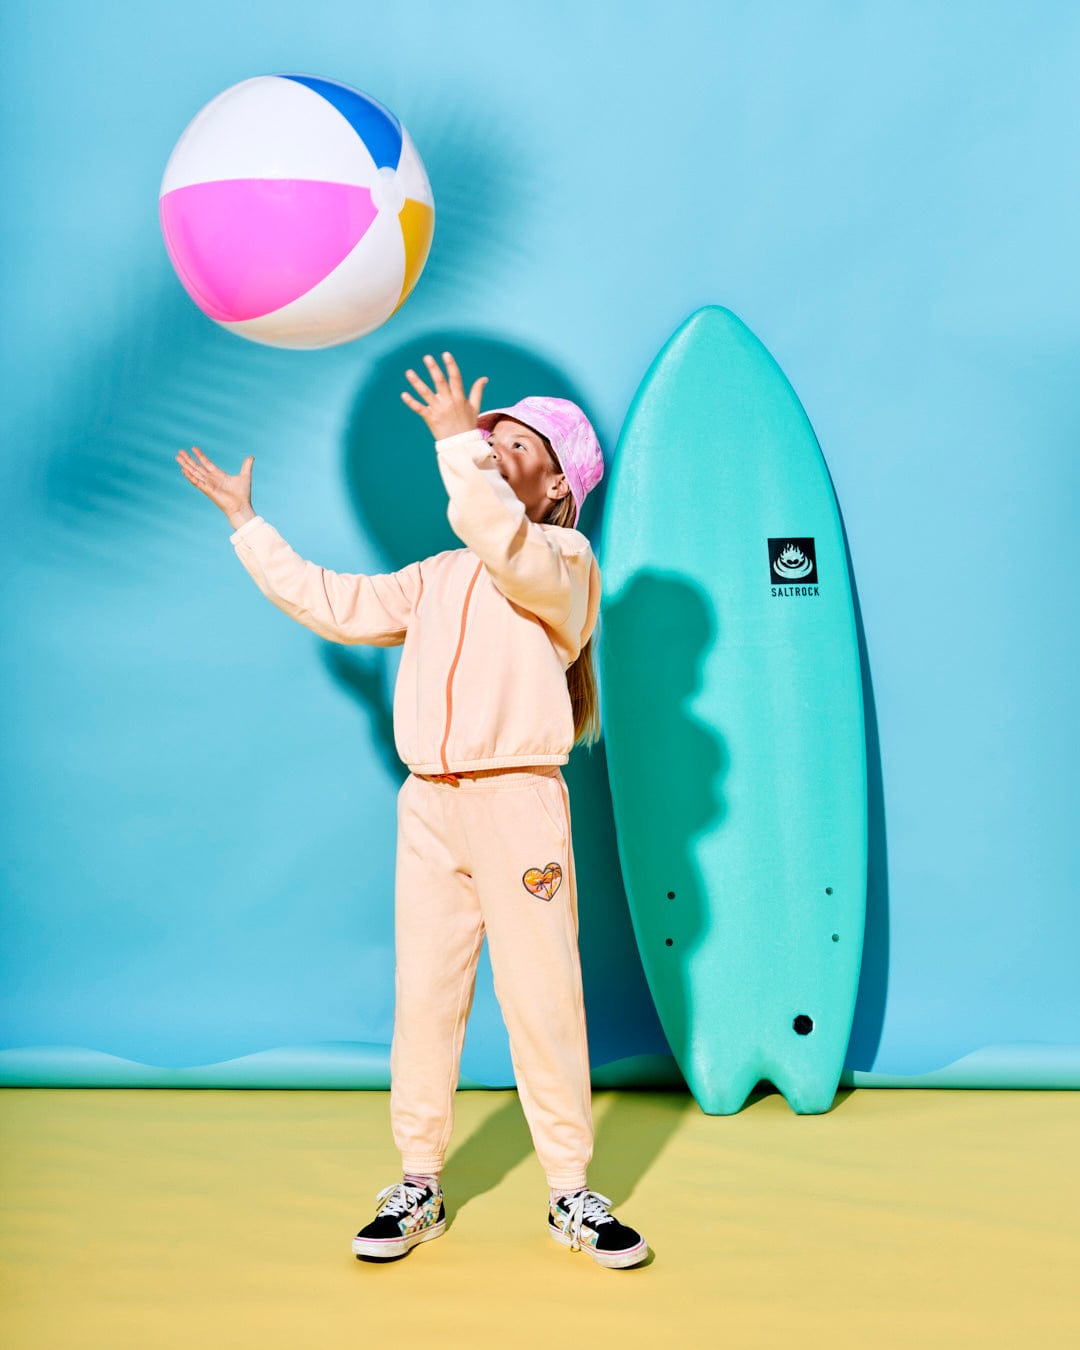 A person in pastel sportswear and a pink cap tosses a beach ball. Clad in Saltrock branded Sunshine State - Kids Joggers - Peach with an elasticated waistband, they stand before a surfboard leaning against a blue wall behind them.